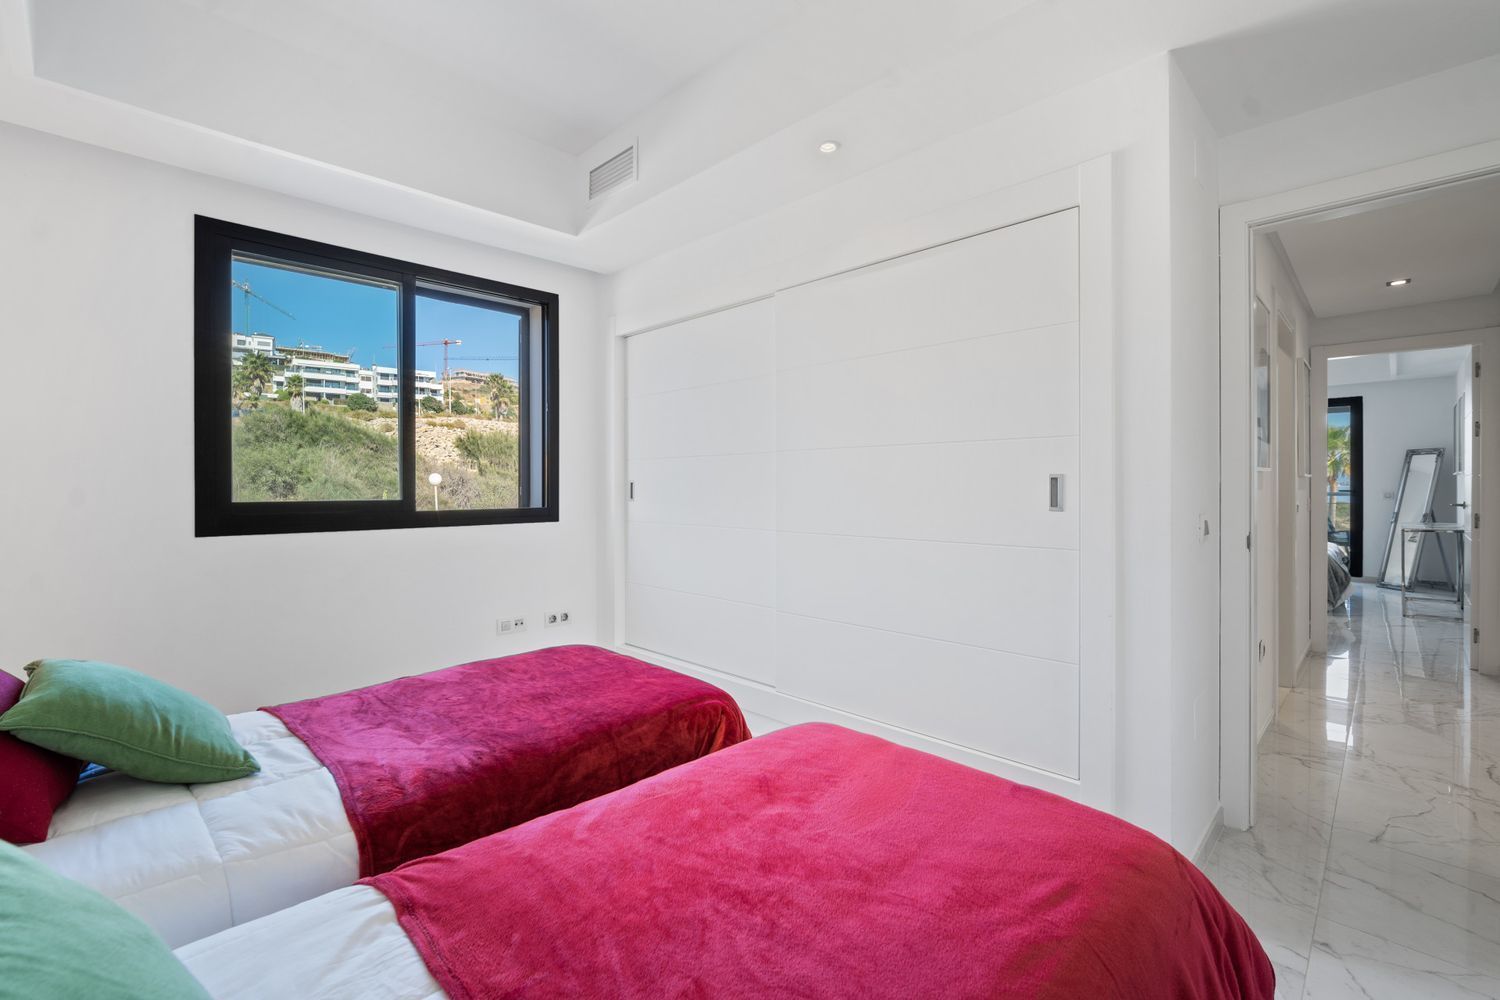 Flat for sale in Casares